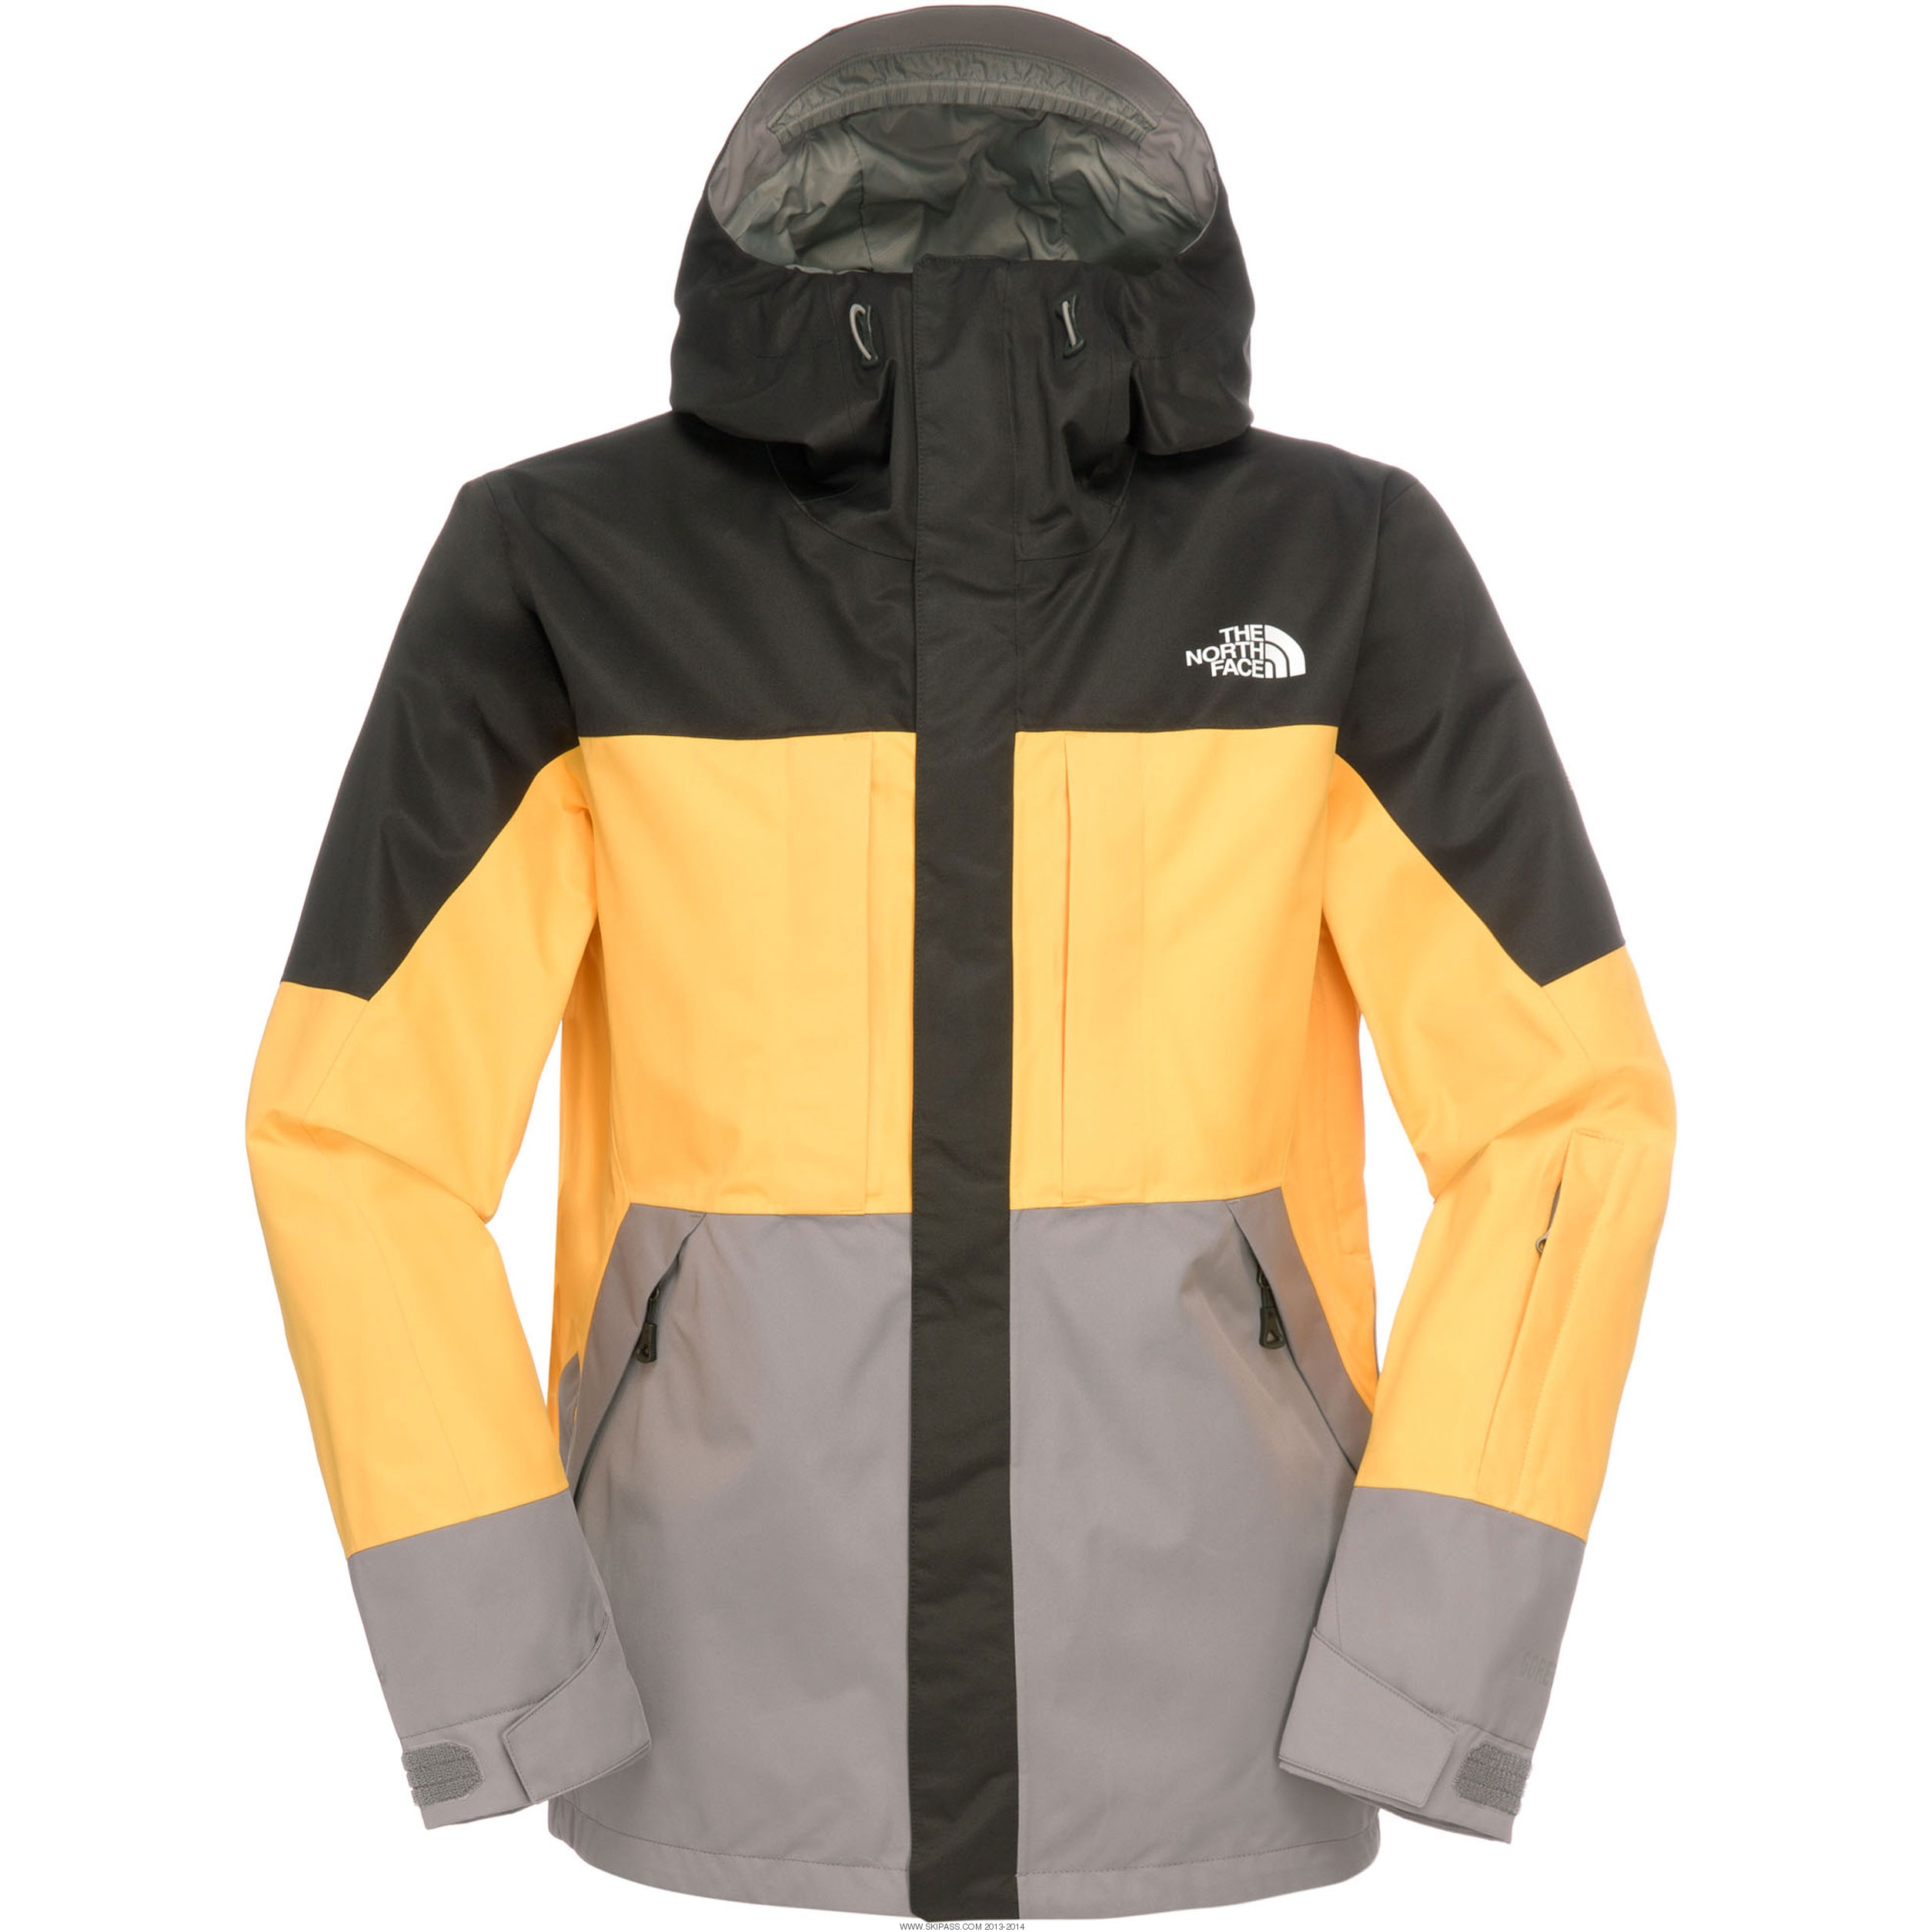 The North Face - nfz 2014